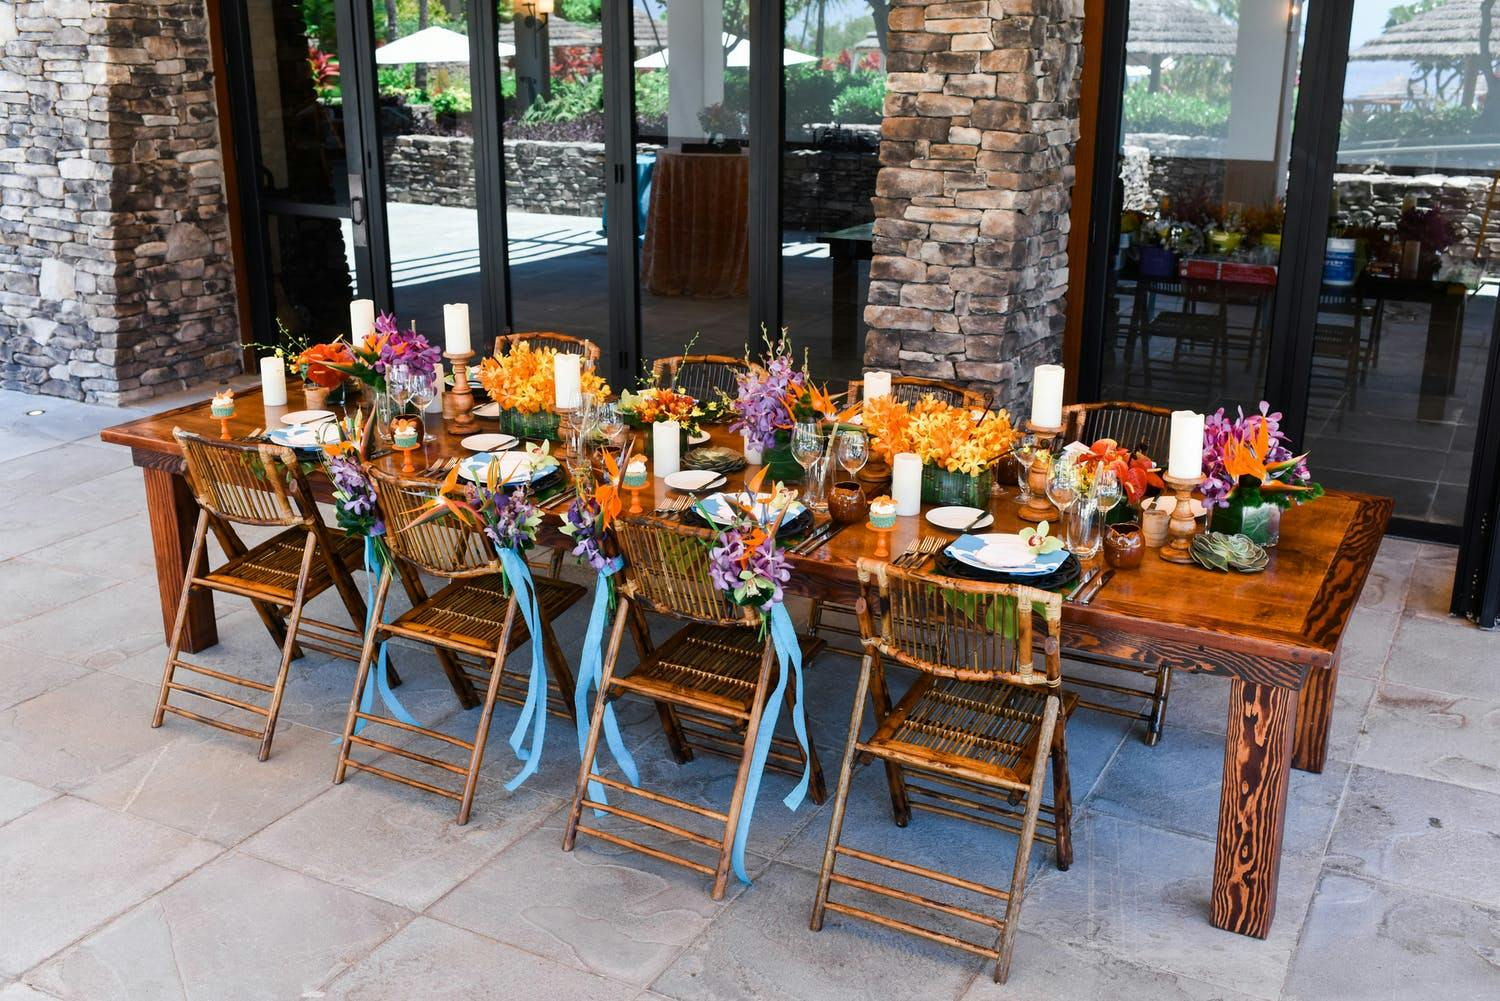 Rustic Beach Tablescape With Pops of Orange, Purple, and Blue | PartySlate